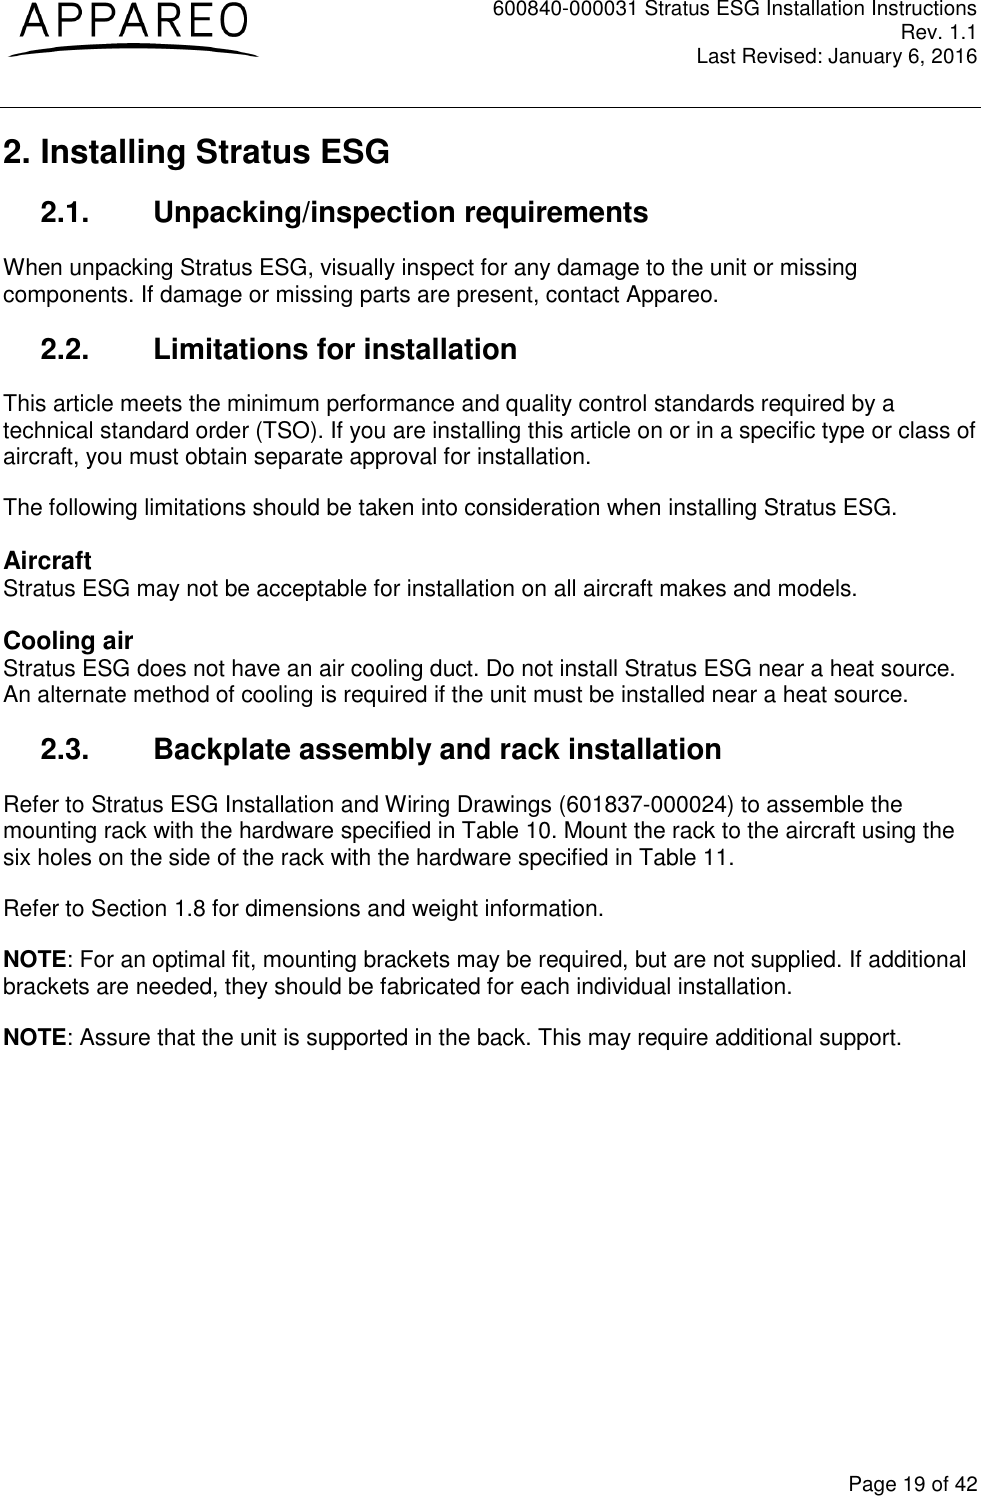 600840-000031 Stratus ESG Installation Instructions Rev. 1.1 Last Revised: January 6, 2016  Page 19 of 42 2. Installing Stratus ESG 2.1.  Unpacking/inspection requirements When unpacking Stratus ESG, visually inspect for any damage to the unit or missing components. If damage or missing parts are present, contact Appareo. 2.2.  Limitations for installation This article meets the minimum performance and quality control standards required by a technical standard order (TSO). If you are installing this article on or in a specific type or class of aircraft, you must obtain separate approval for installation. The following limitations should be taken into consideration when installing Stratus ESG. Aircraft Stratus ESG may not be acceptable for installation on all aircraft makes and models. Cooling air Stratus ESG does not have an air cooling duct. Do not install Stratus ESG near a heat source. An alternate method of cooling is required if the unit must be installed near a heat source. 2.3.  Backplate assembly and rack installation Refer to Stratus ESG Installation and Wiring Drawings (601837-000024) to assemble the mounting rack with the hardware specified in Table 10. Mount the rack to the aircraft using the six holes on the side of the rack with the hardware specified in Table 11. Refer to Section 1.8 for dimensions and weight information. NOTE: For an optimal fit, mounting brackets may be required, but are not supplied. If additional brackets are needed, they should be fabricated for each individual installation. NOTE: Assure that the unit is supported in the back. This may require additional support. 